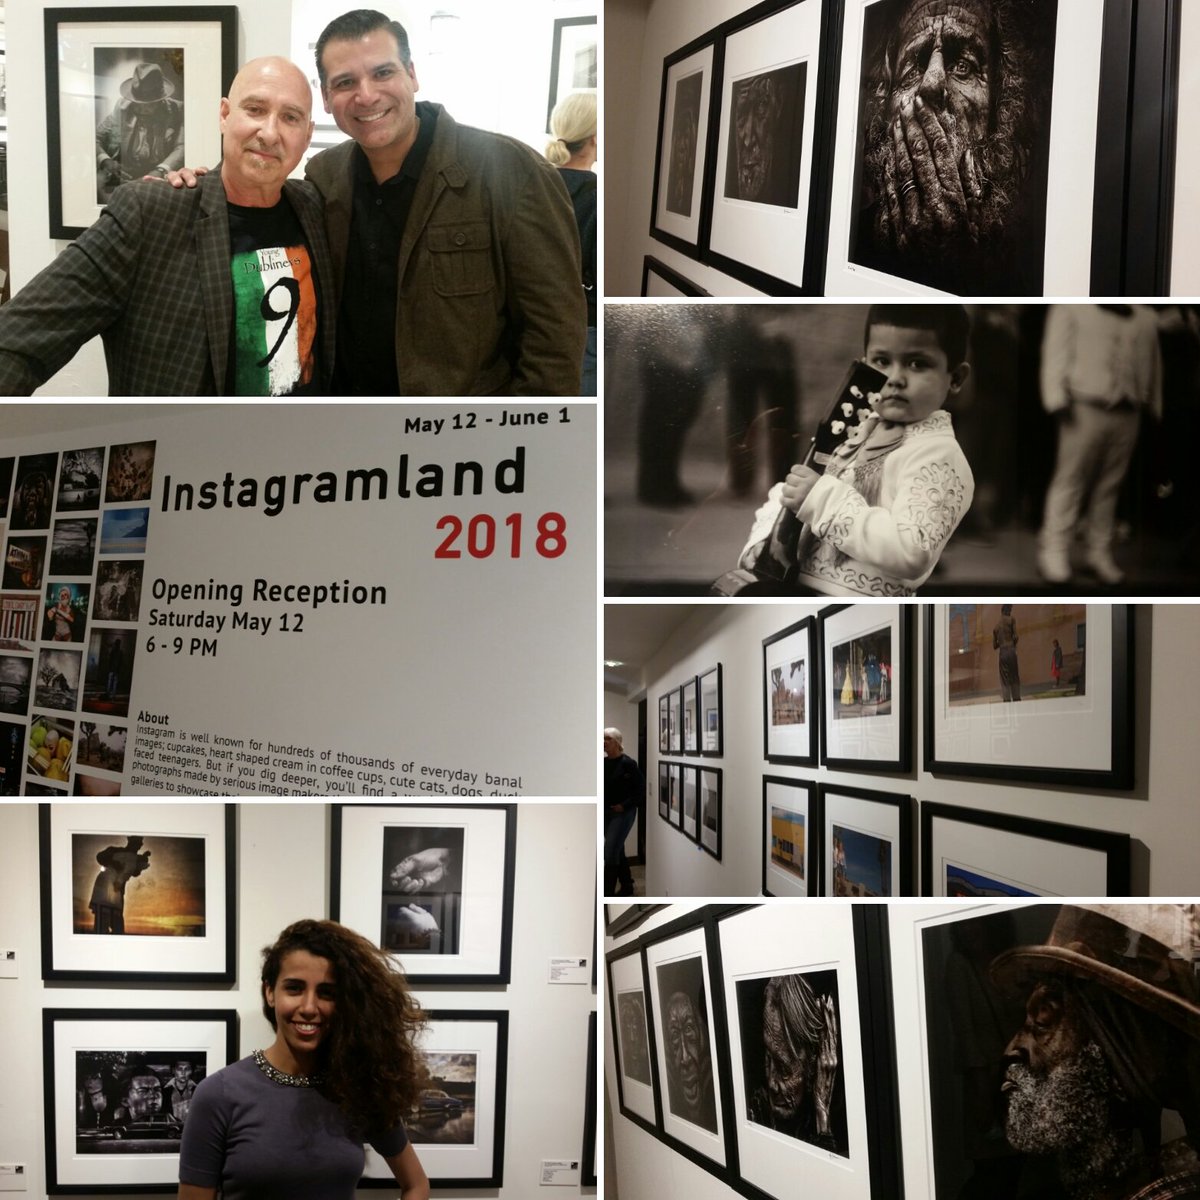 This is a must! If you appreciate Insagram photos and captivating work, stop by Instagramland 2018 Exhibit. Runs thru June 1st, 1125 Wilshire. @johnNBCLA. Work by @elnon66 @3m_streetexposure @h.alkhamis @hedvat_s